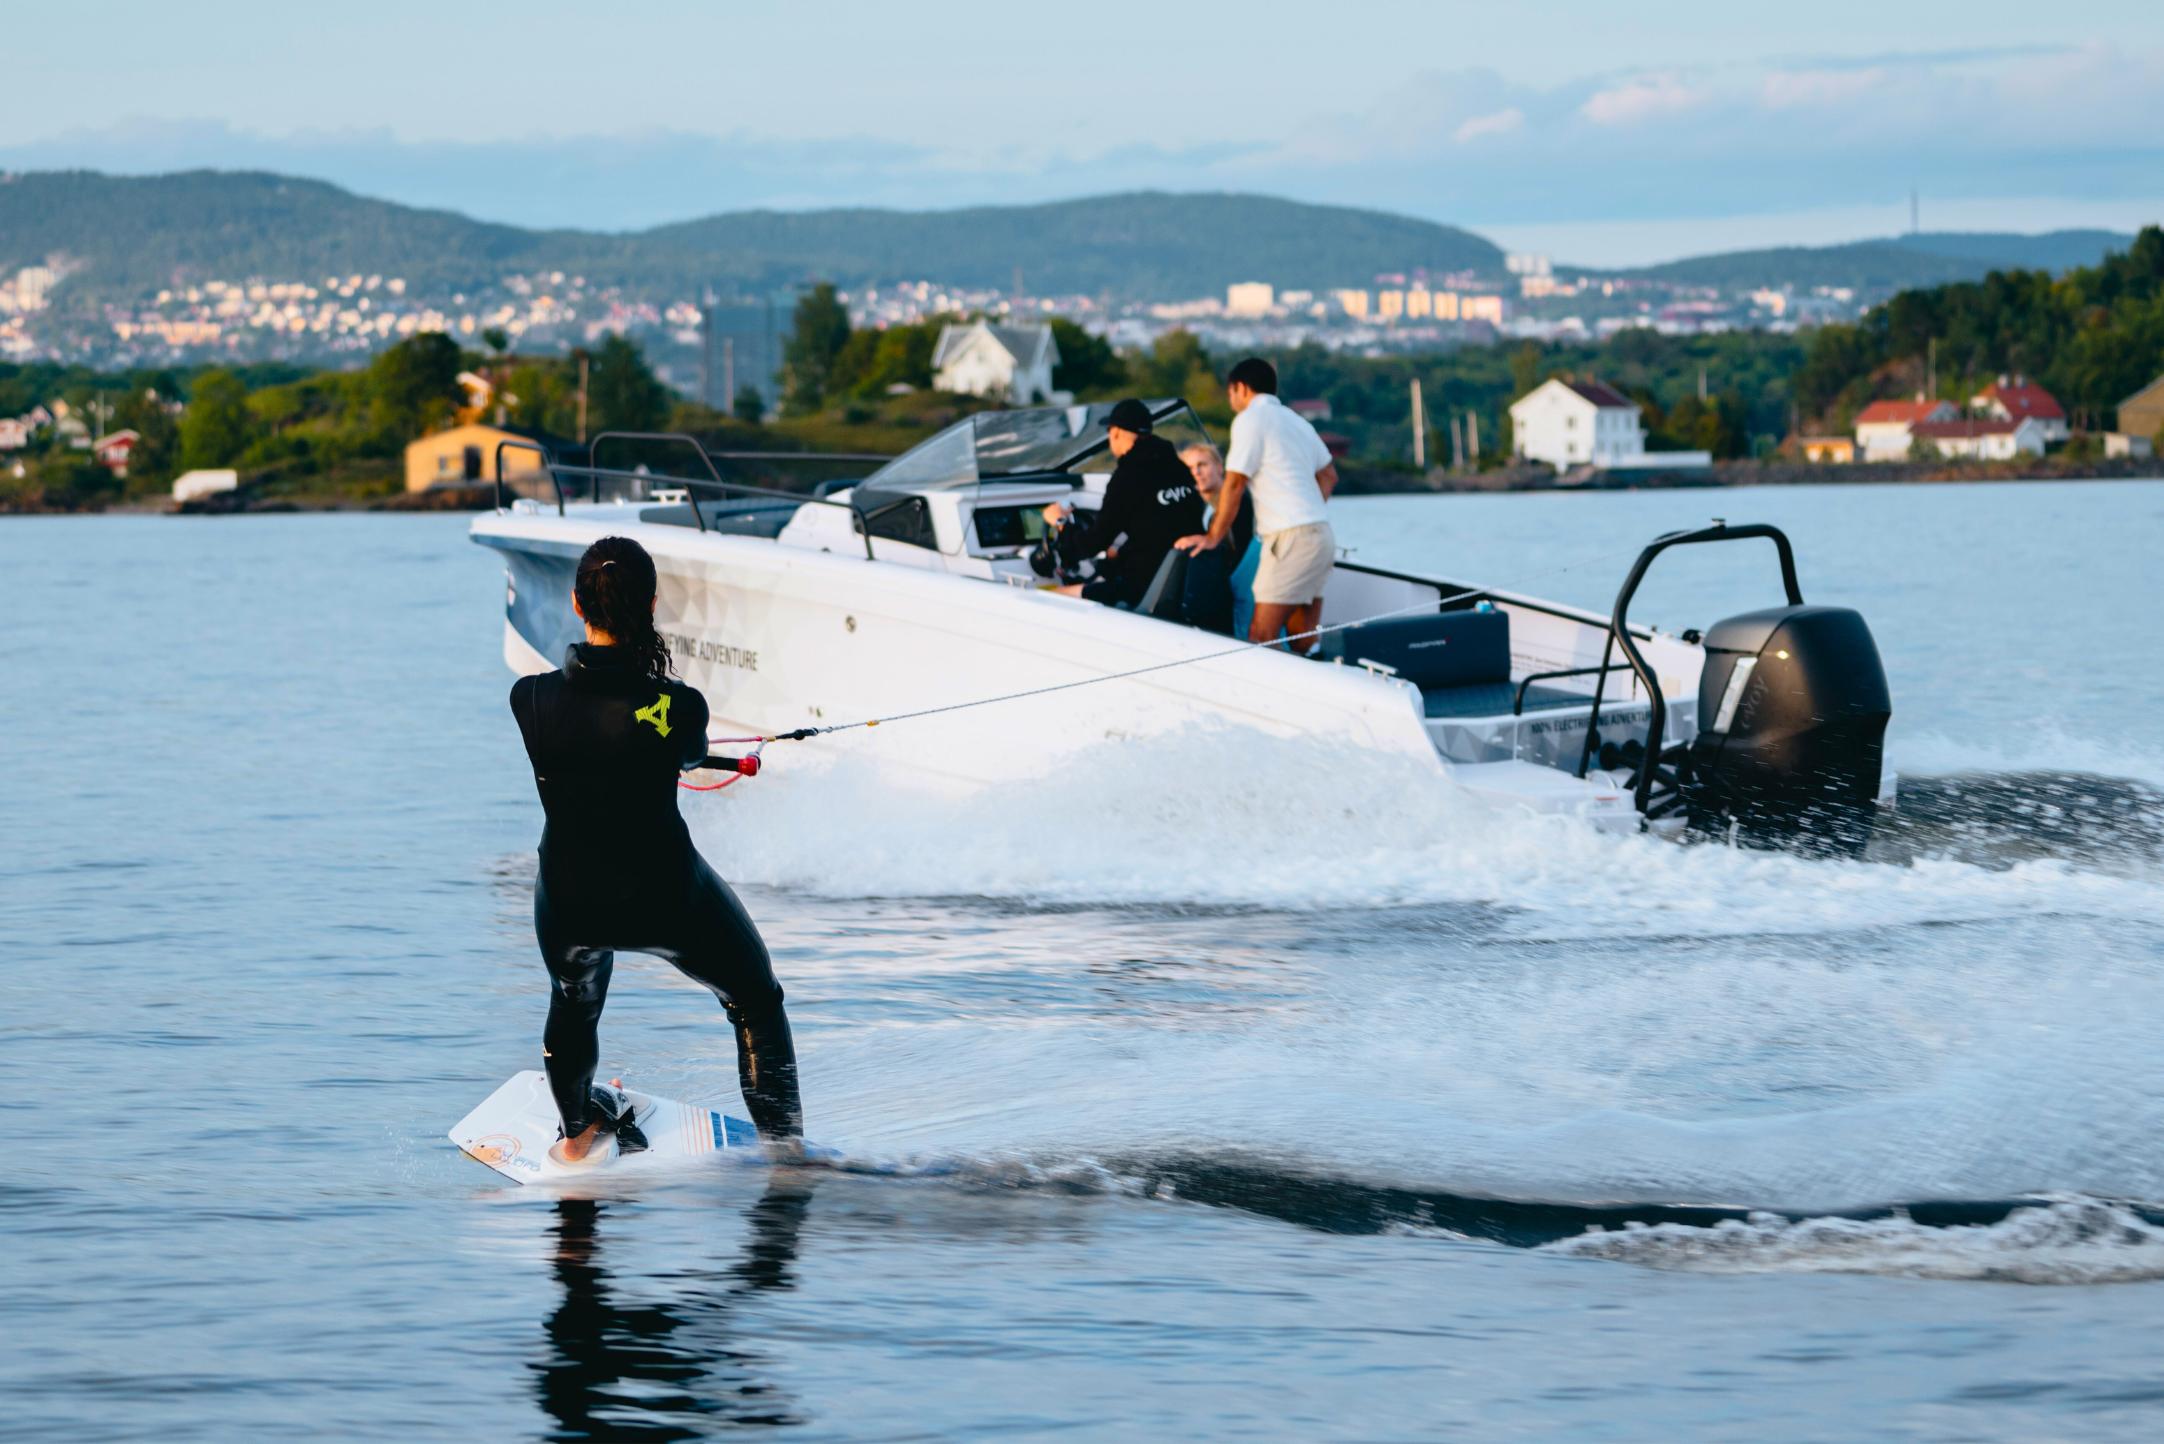 Axopar 25 Powered by Evoy Storm 300hp electric outboard motor - girl wakeboarding